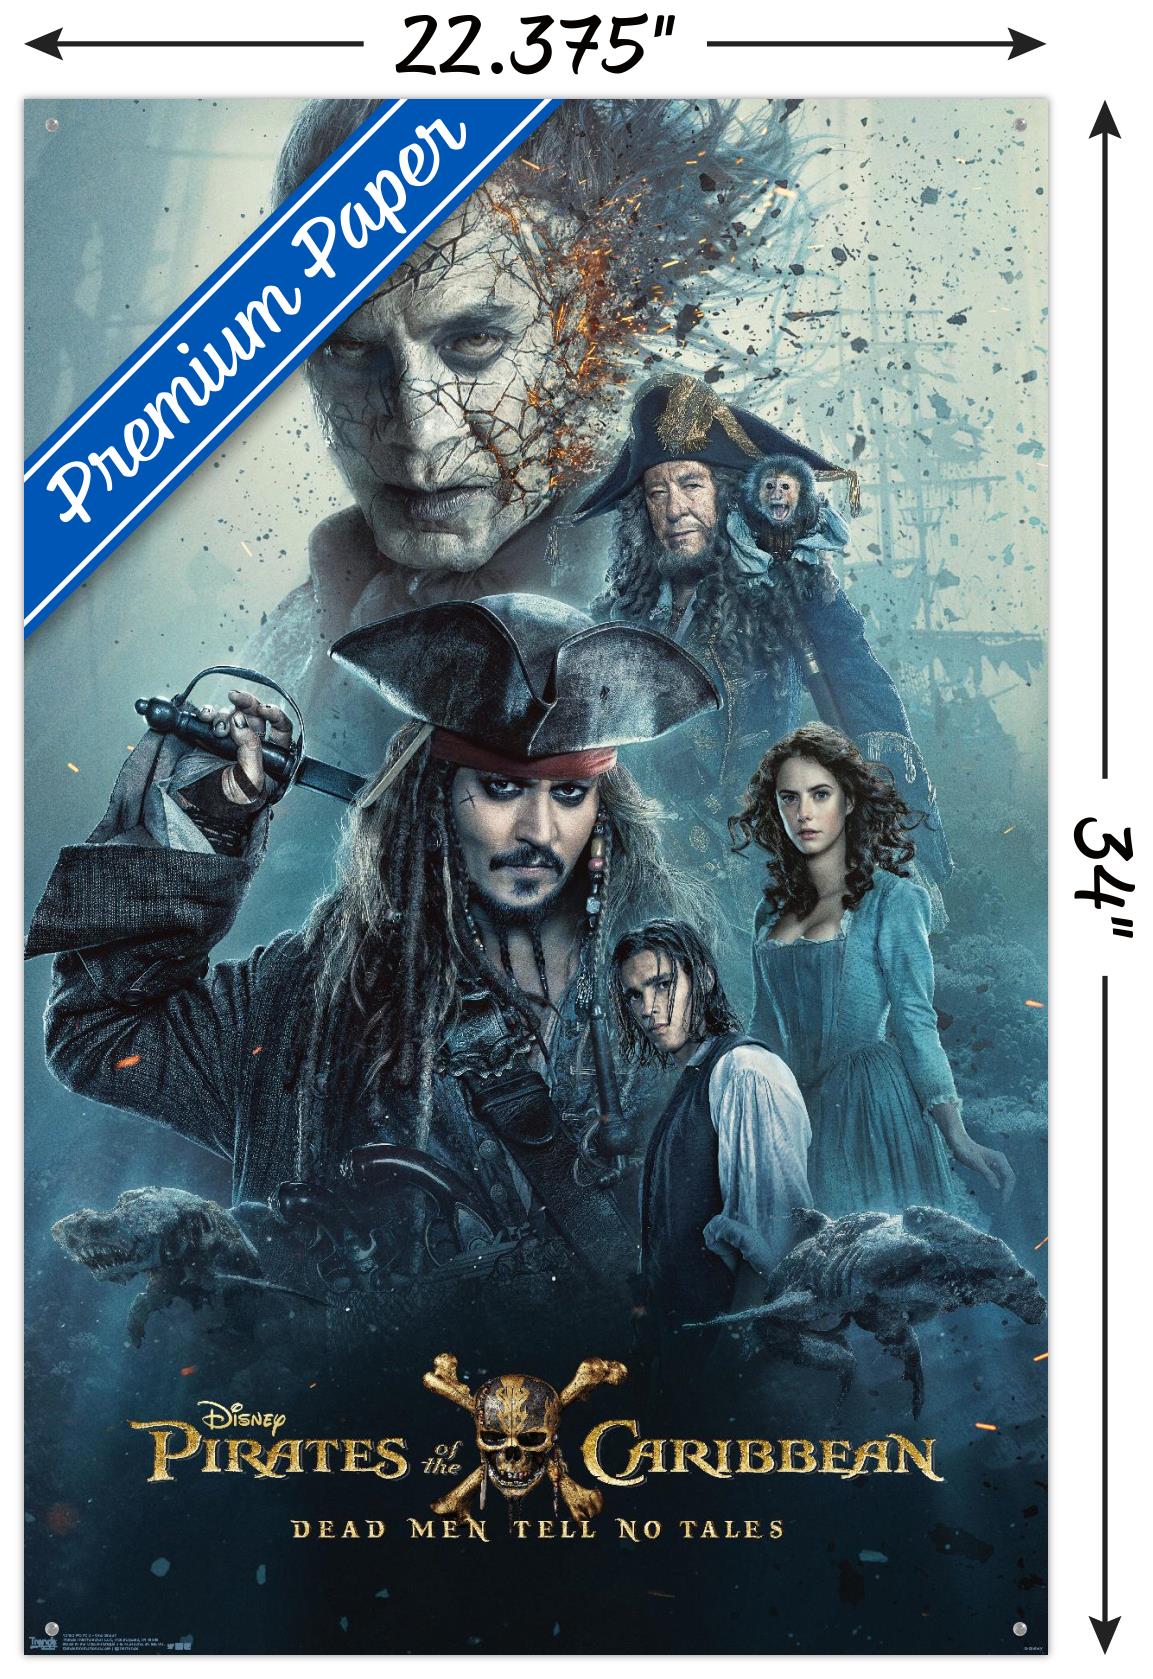 Disney Pirates of the Caribbean: Dead Men Tell No Tales - One Sheet Wall Poster with Push Pins, 22.375" x 34" - image 3 of 6